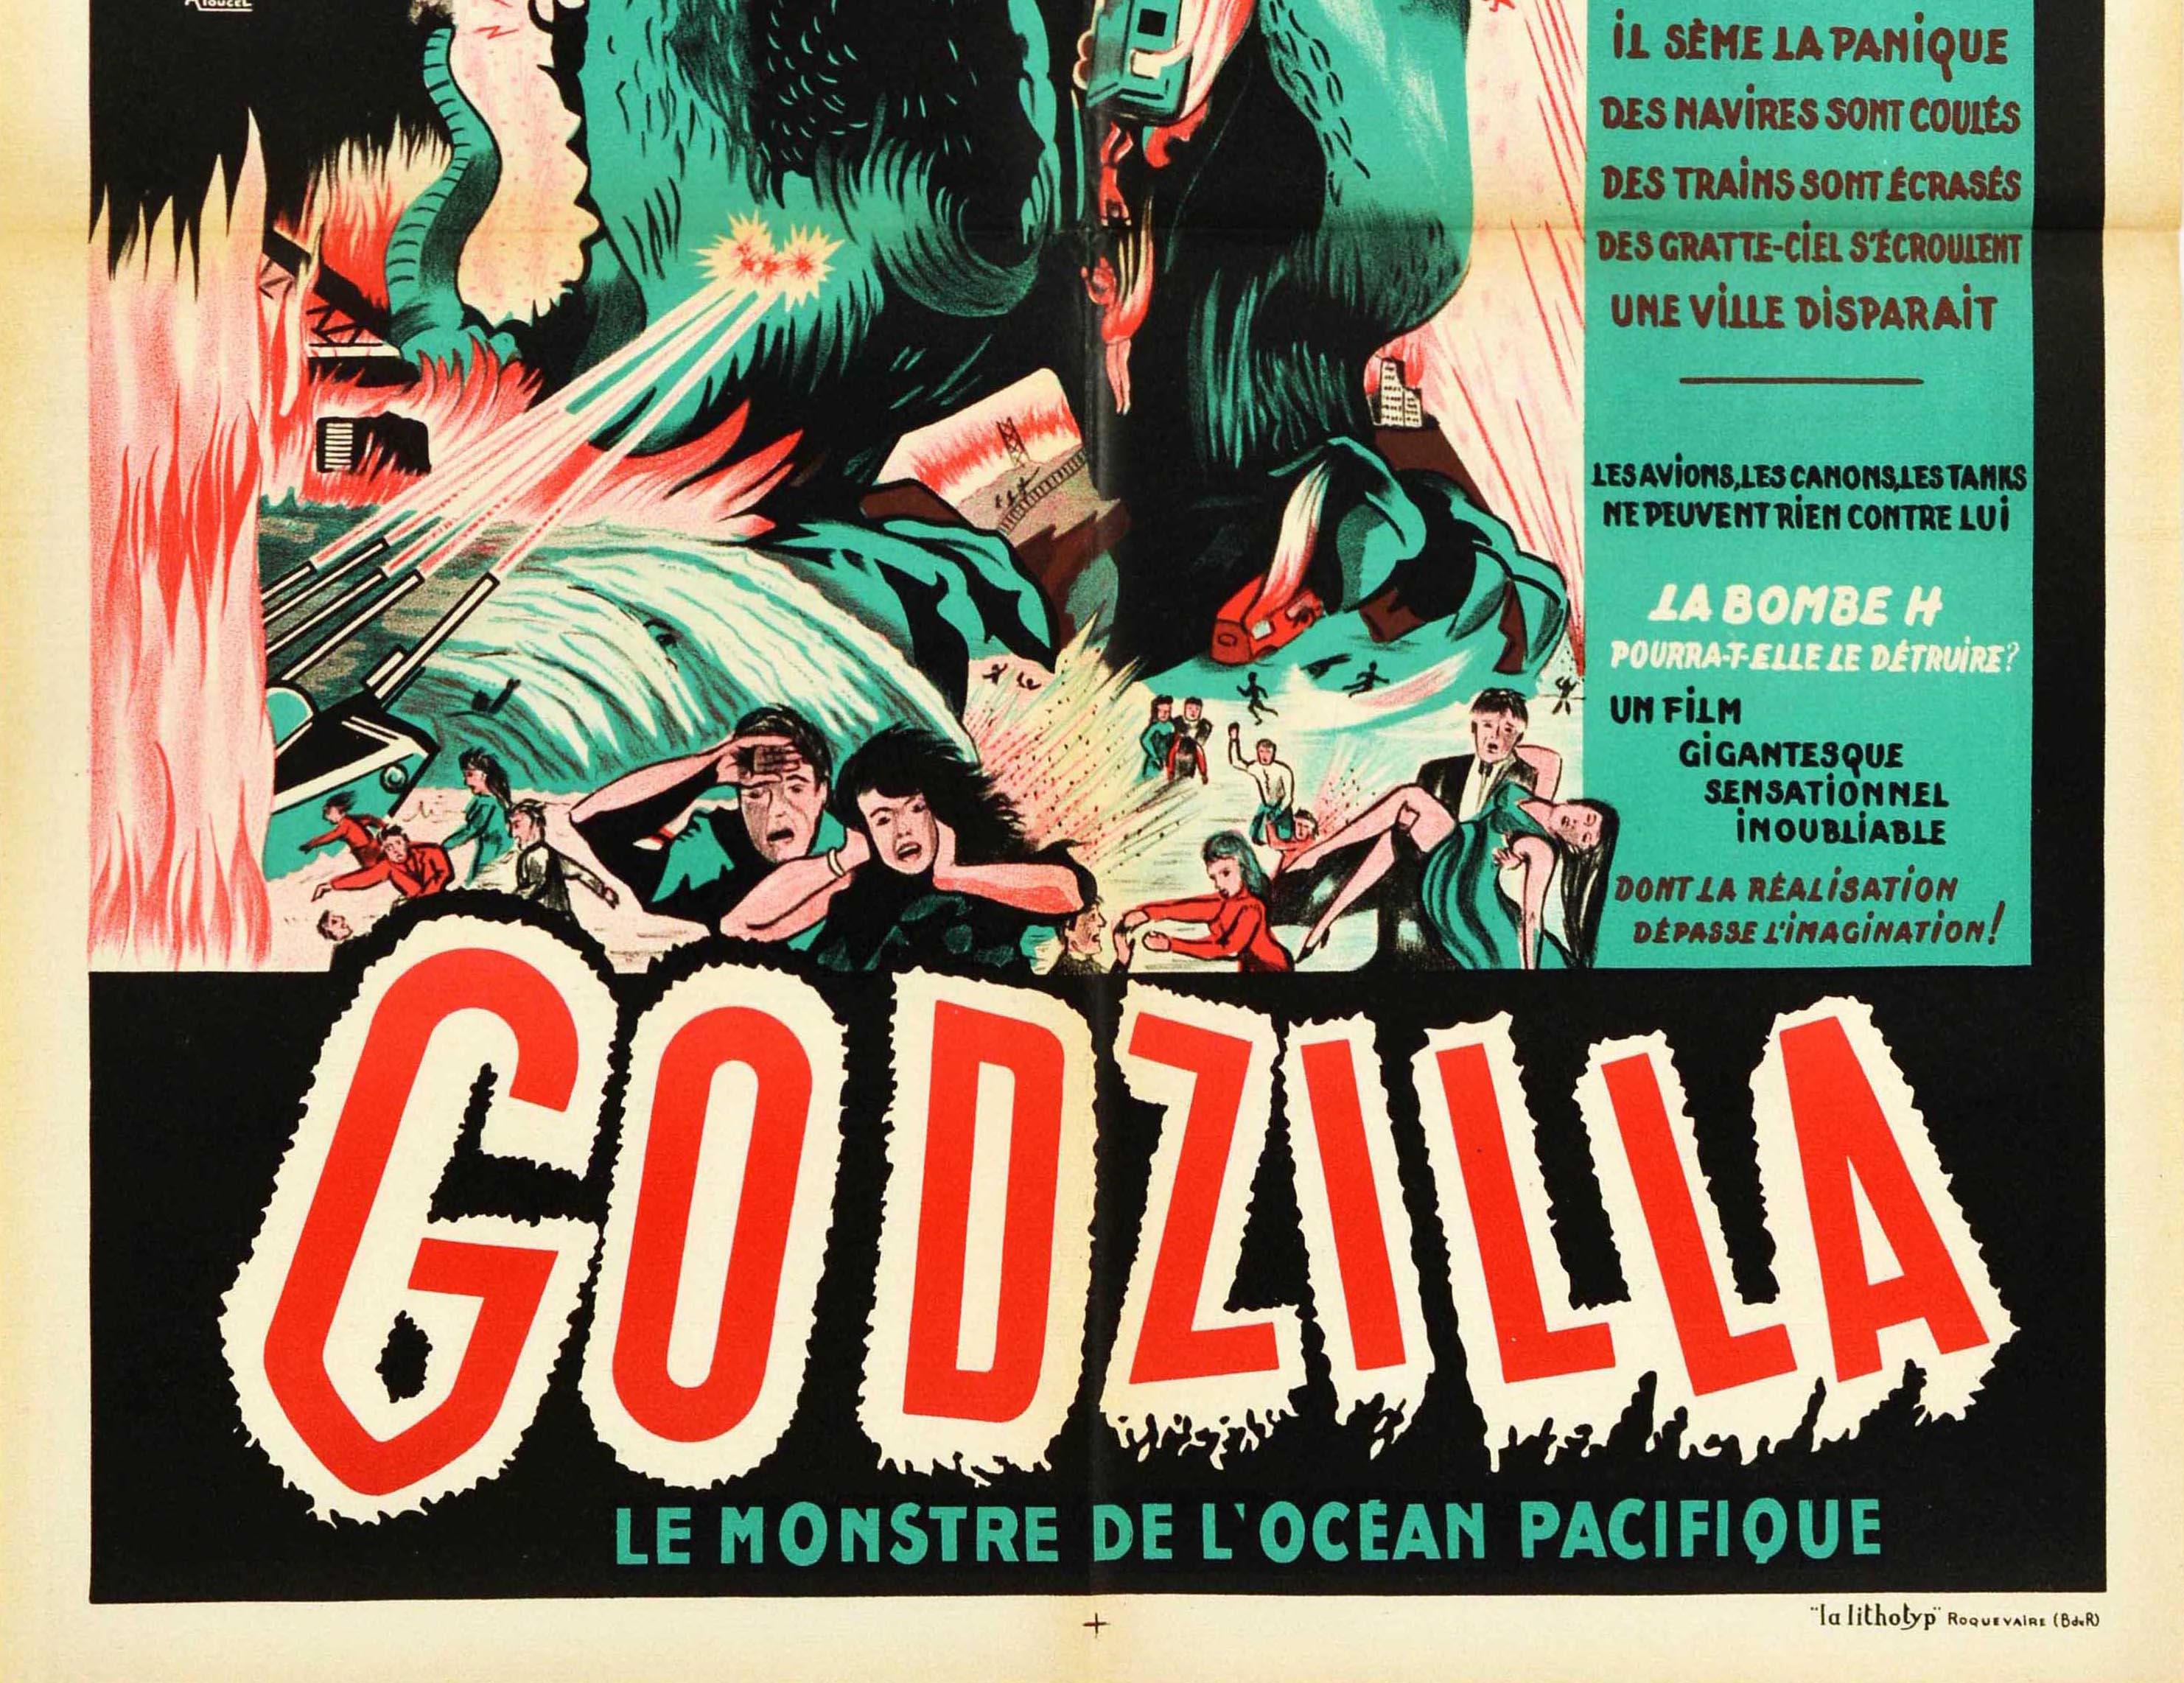 1950's monster movie posters